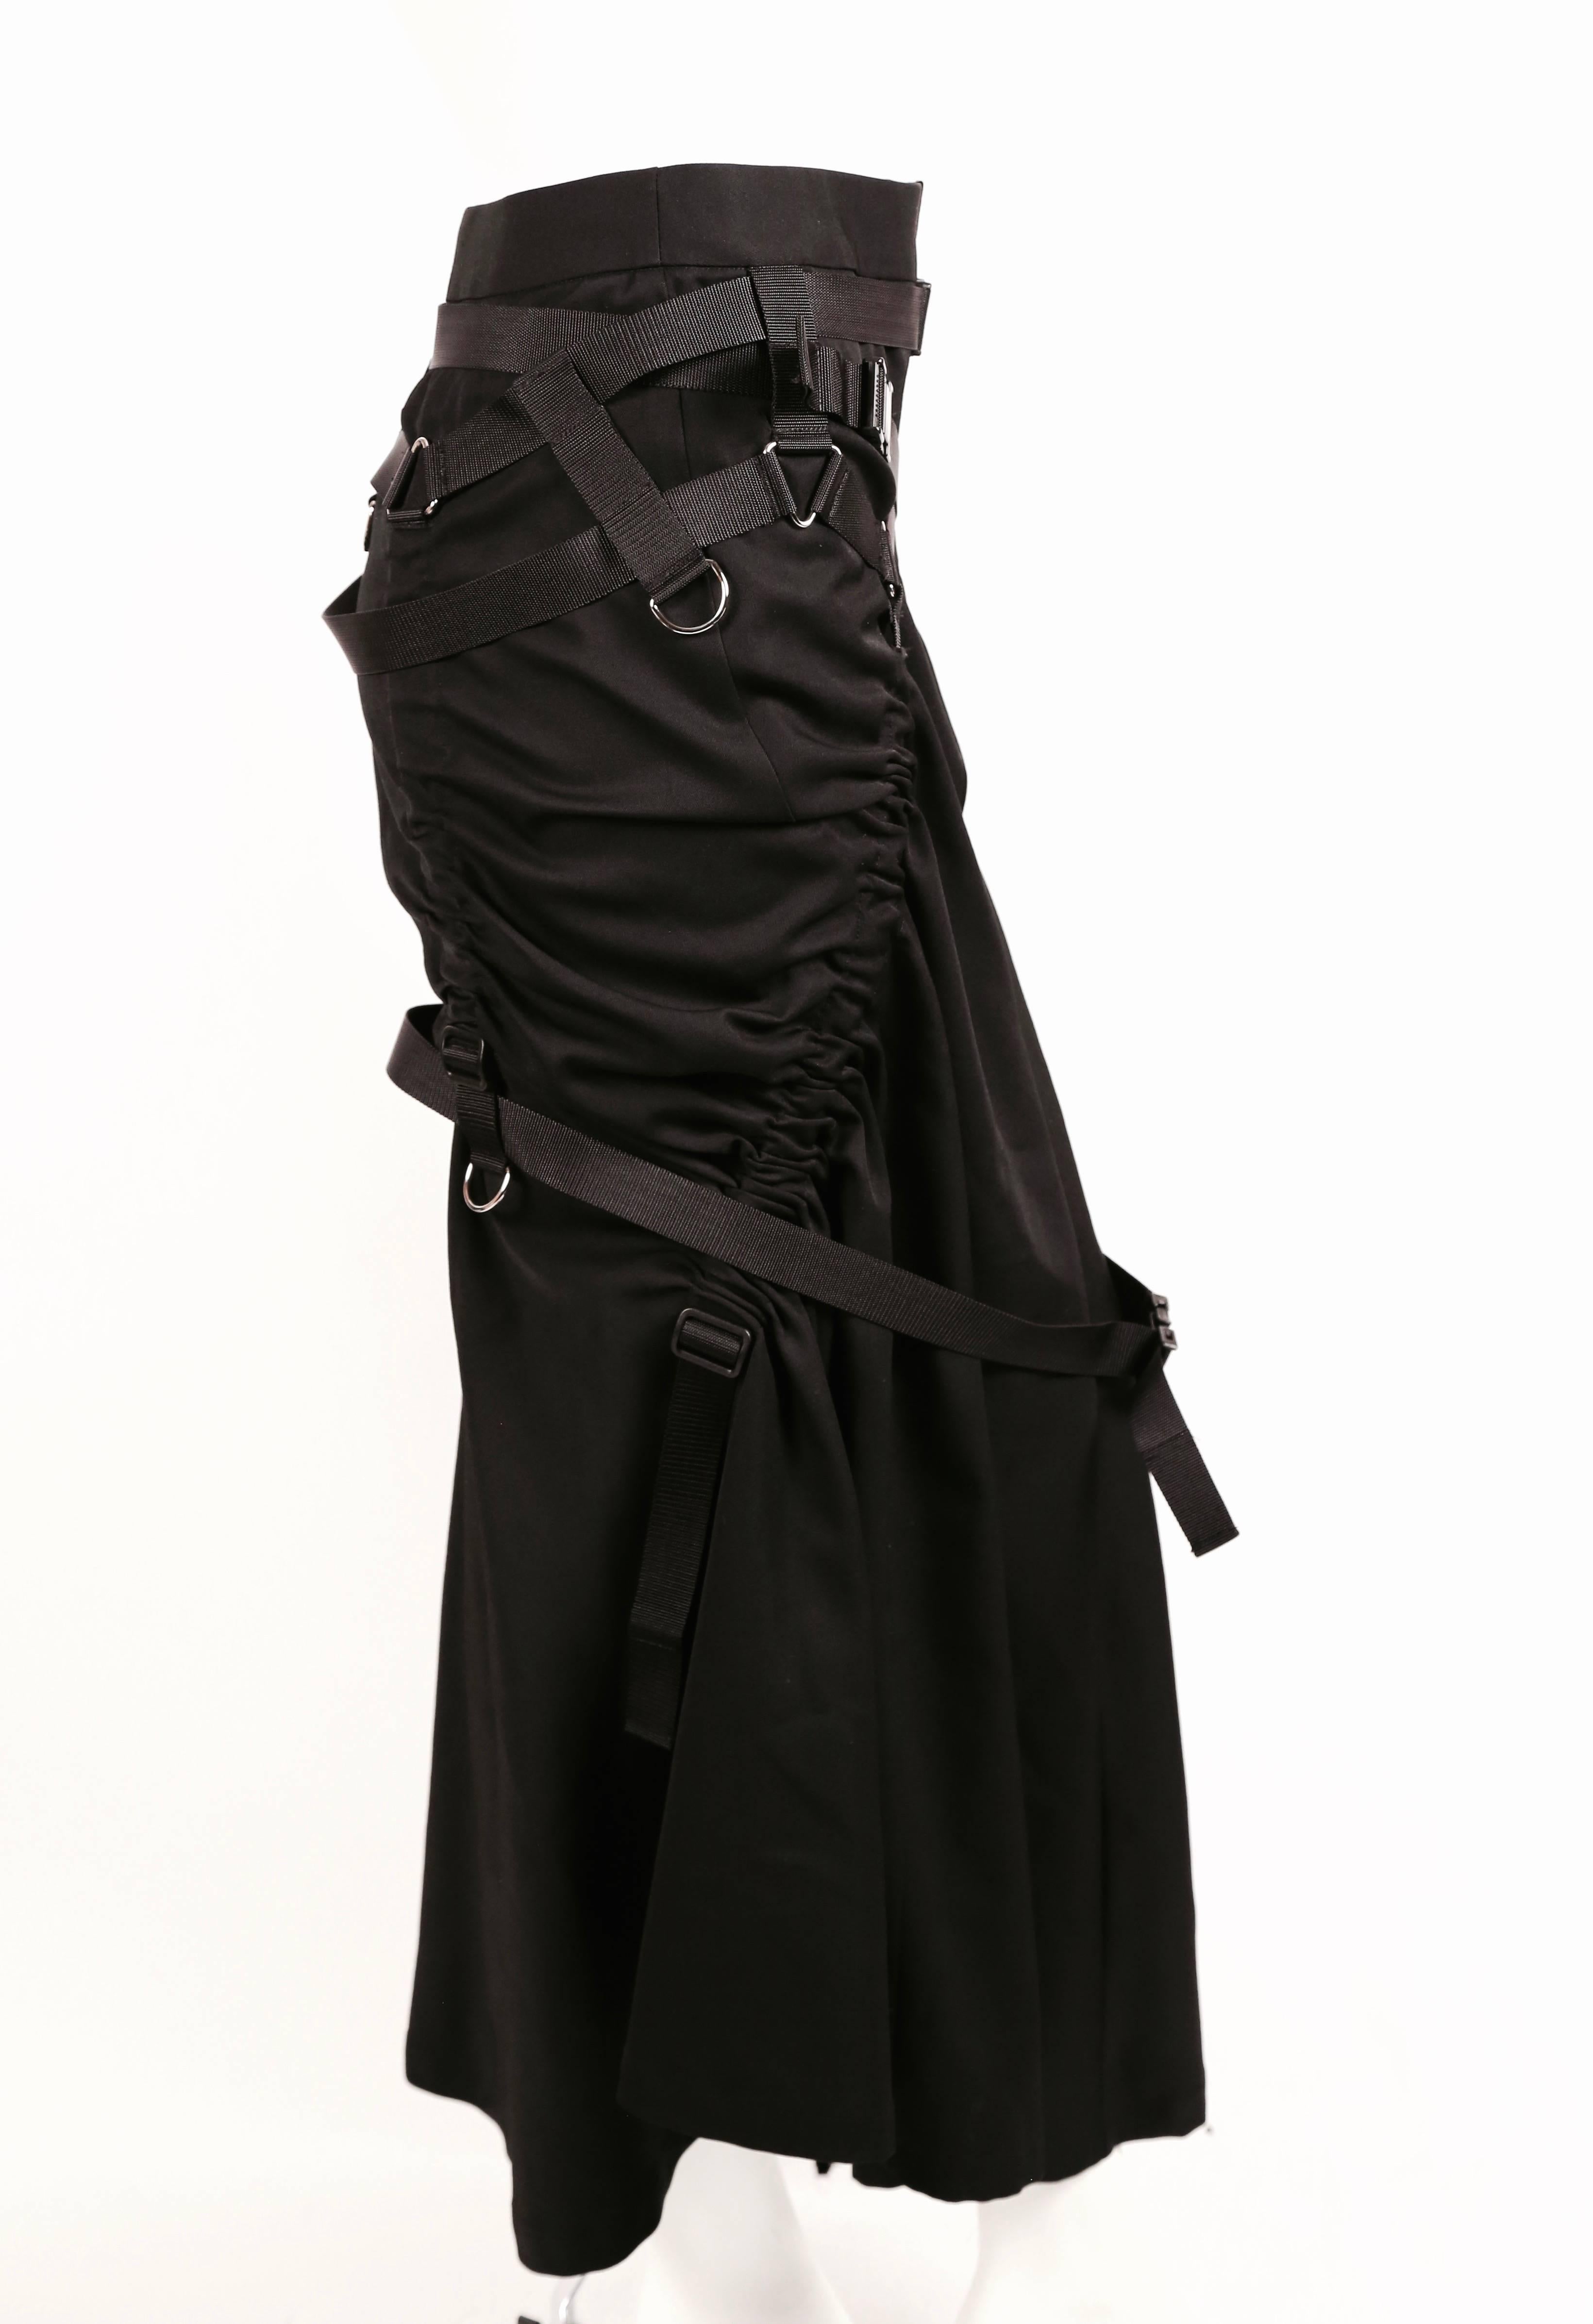 Jet black nylon parachute skirt designed by Junya Watanabe for Comme Des Garcons as seen on spring 2003 runway. Very flattering shape which can be adjusted numerous ways. Size S. Approximate measurements: waist 27.5